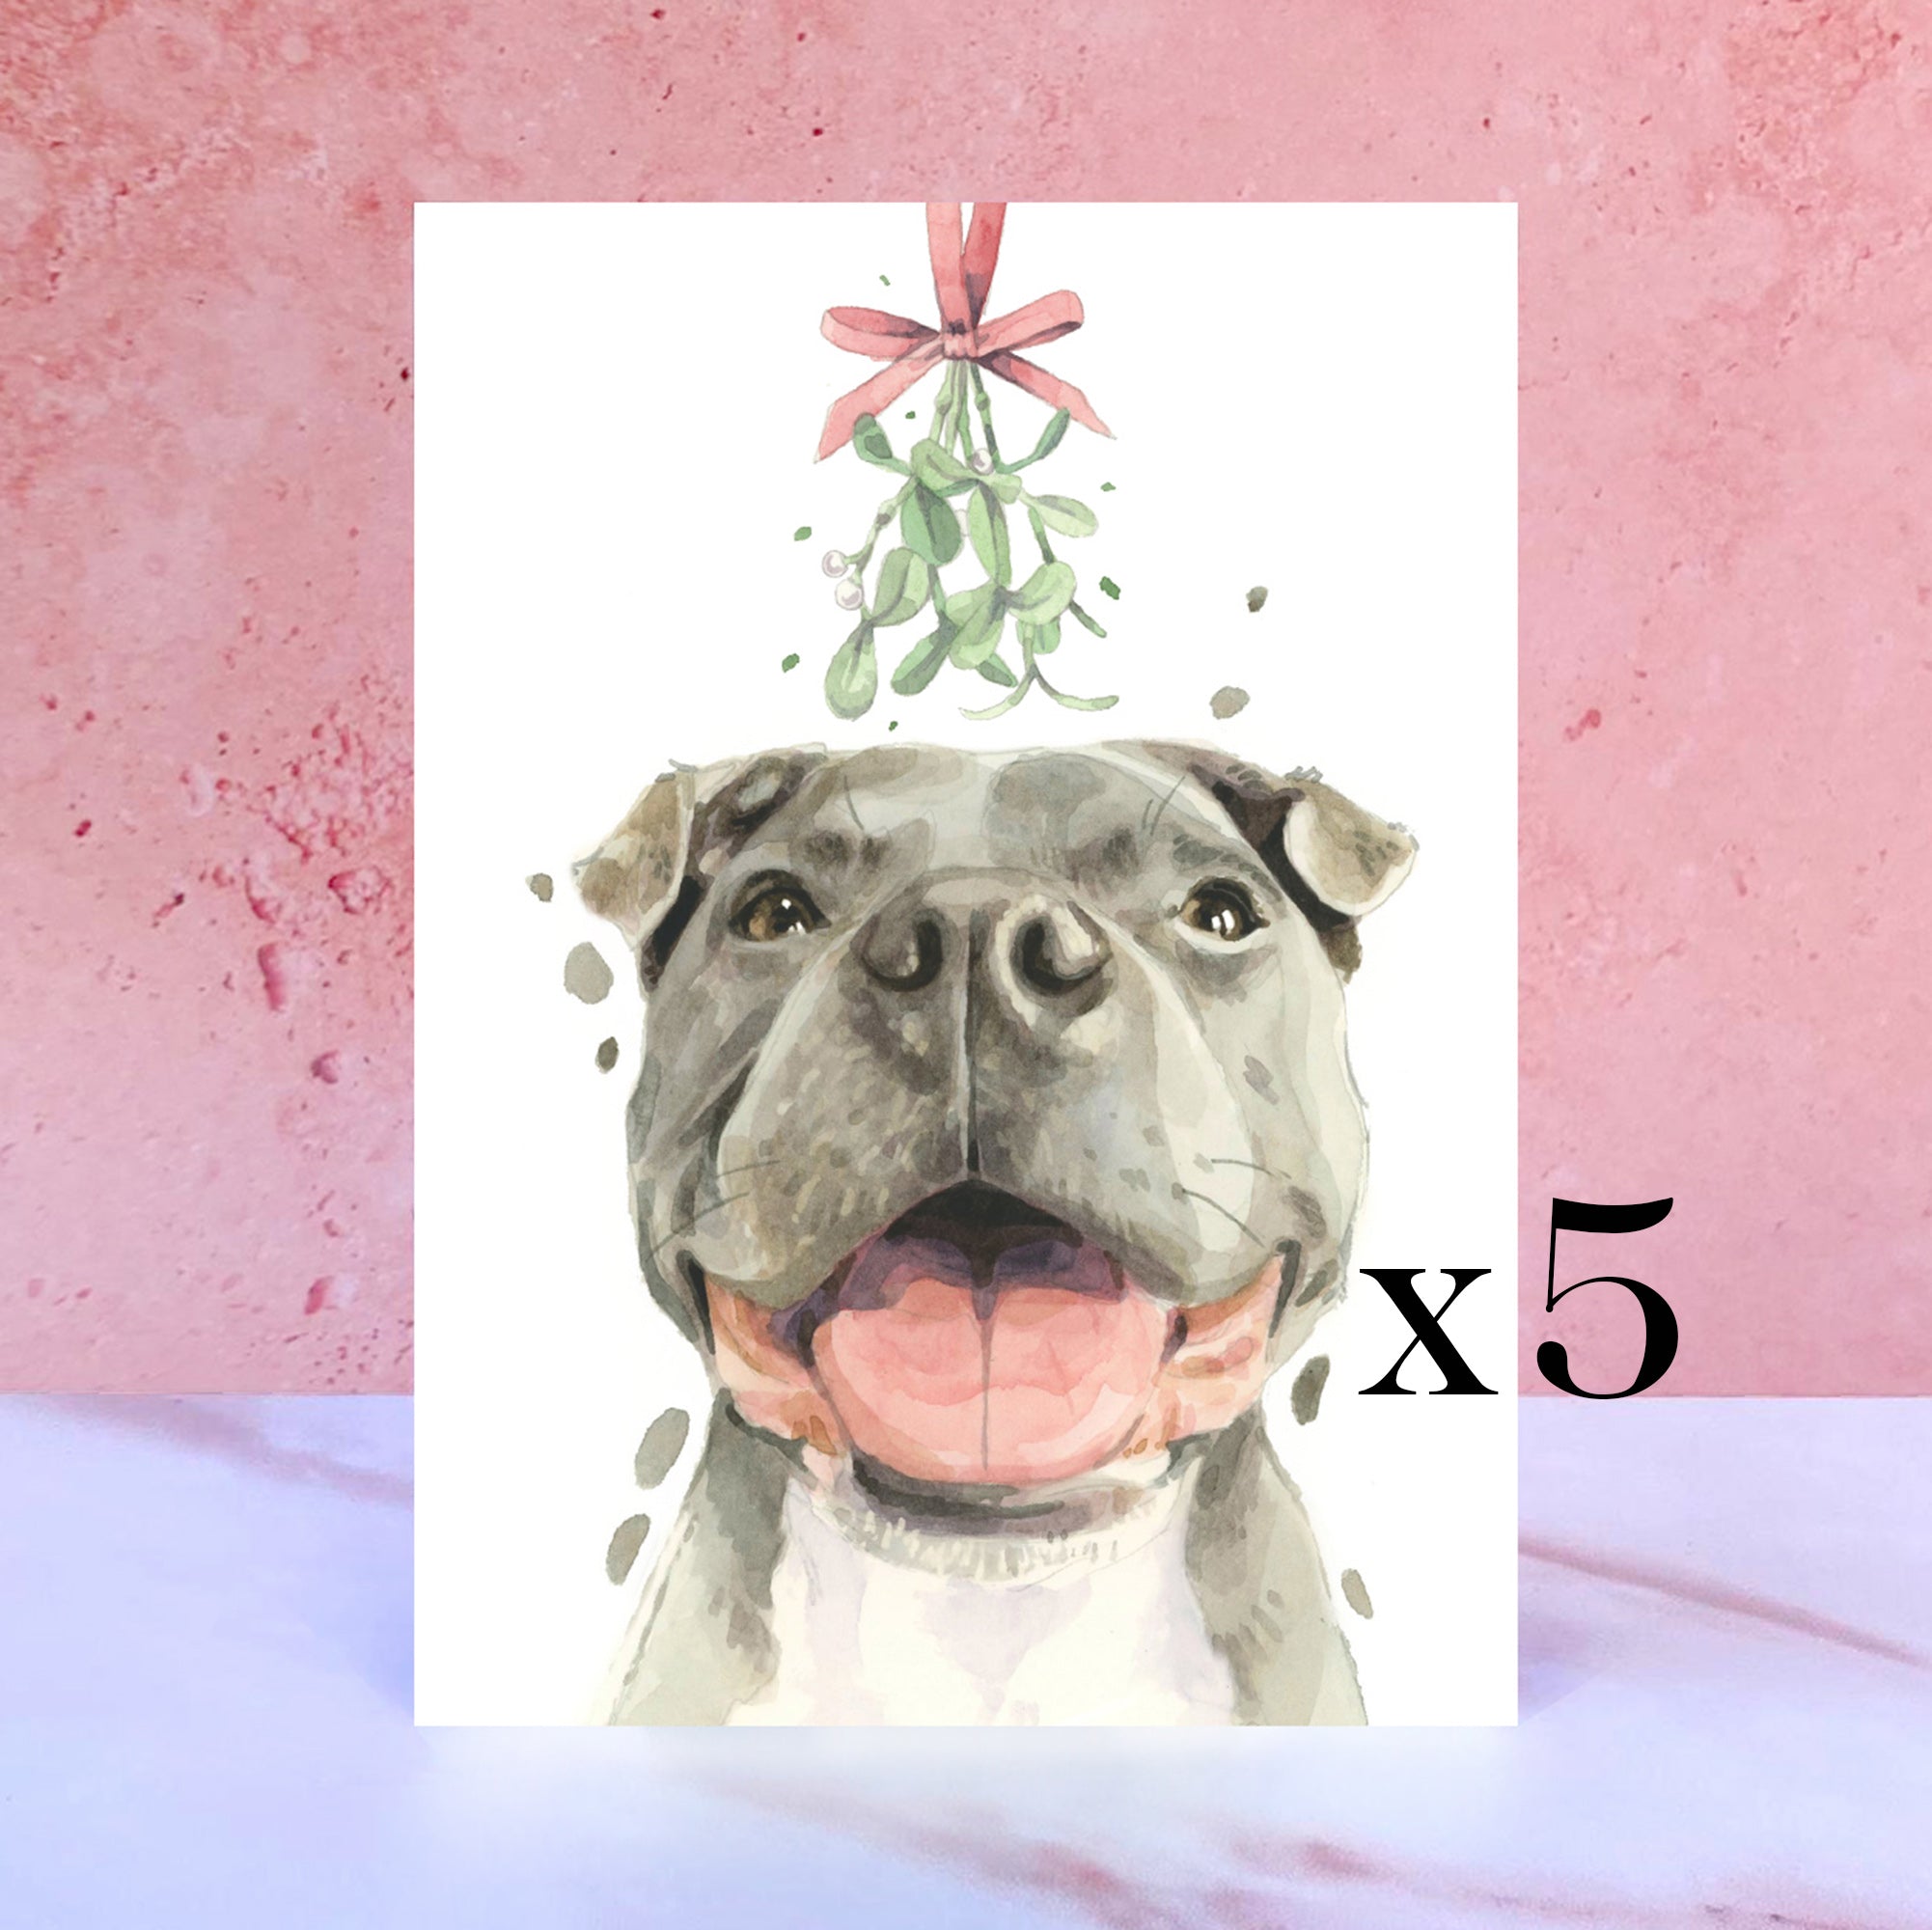 Pack of 5 Staffordshire Bull Terrier Christmas Card, Xmas Staffie Staffy Holiday Greeting Cards